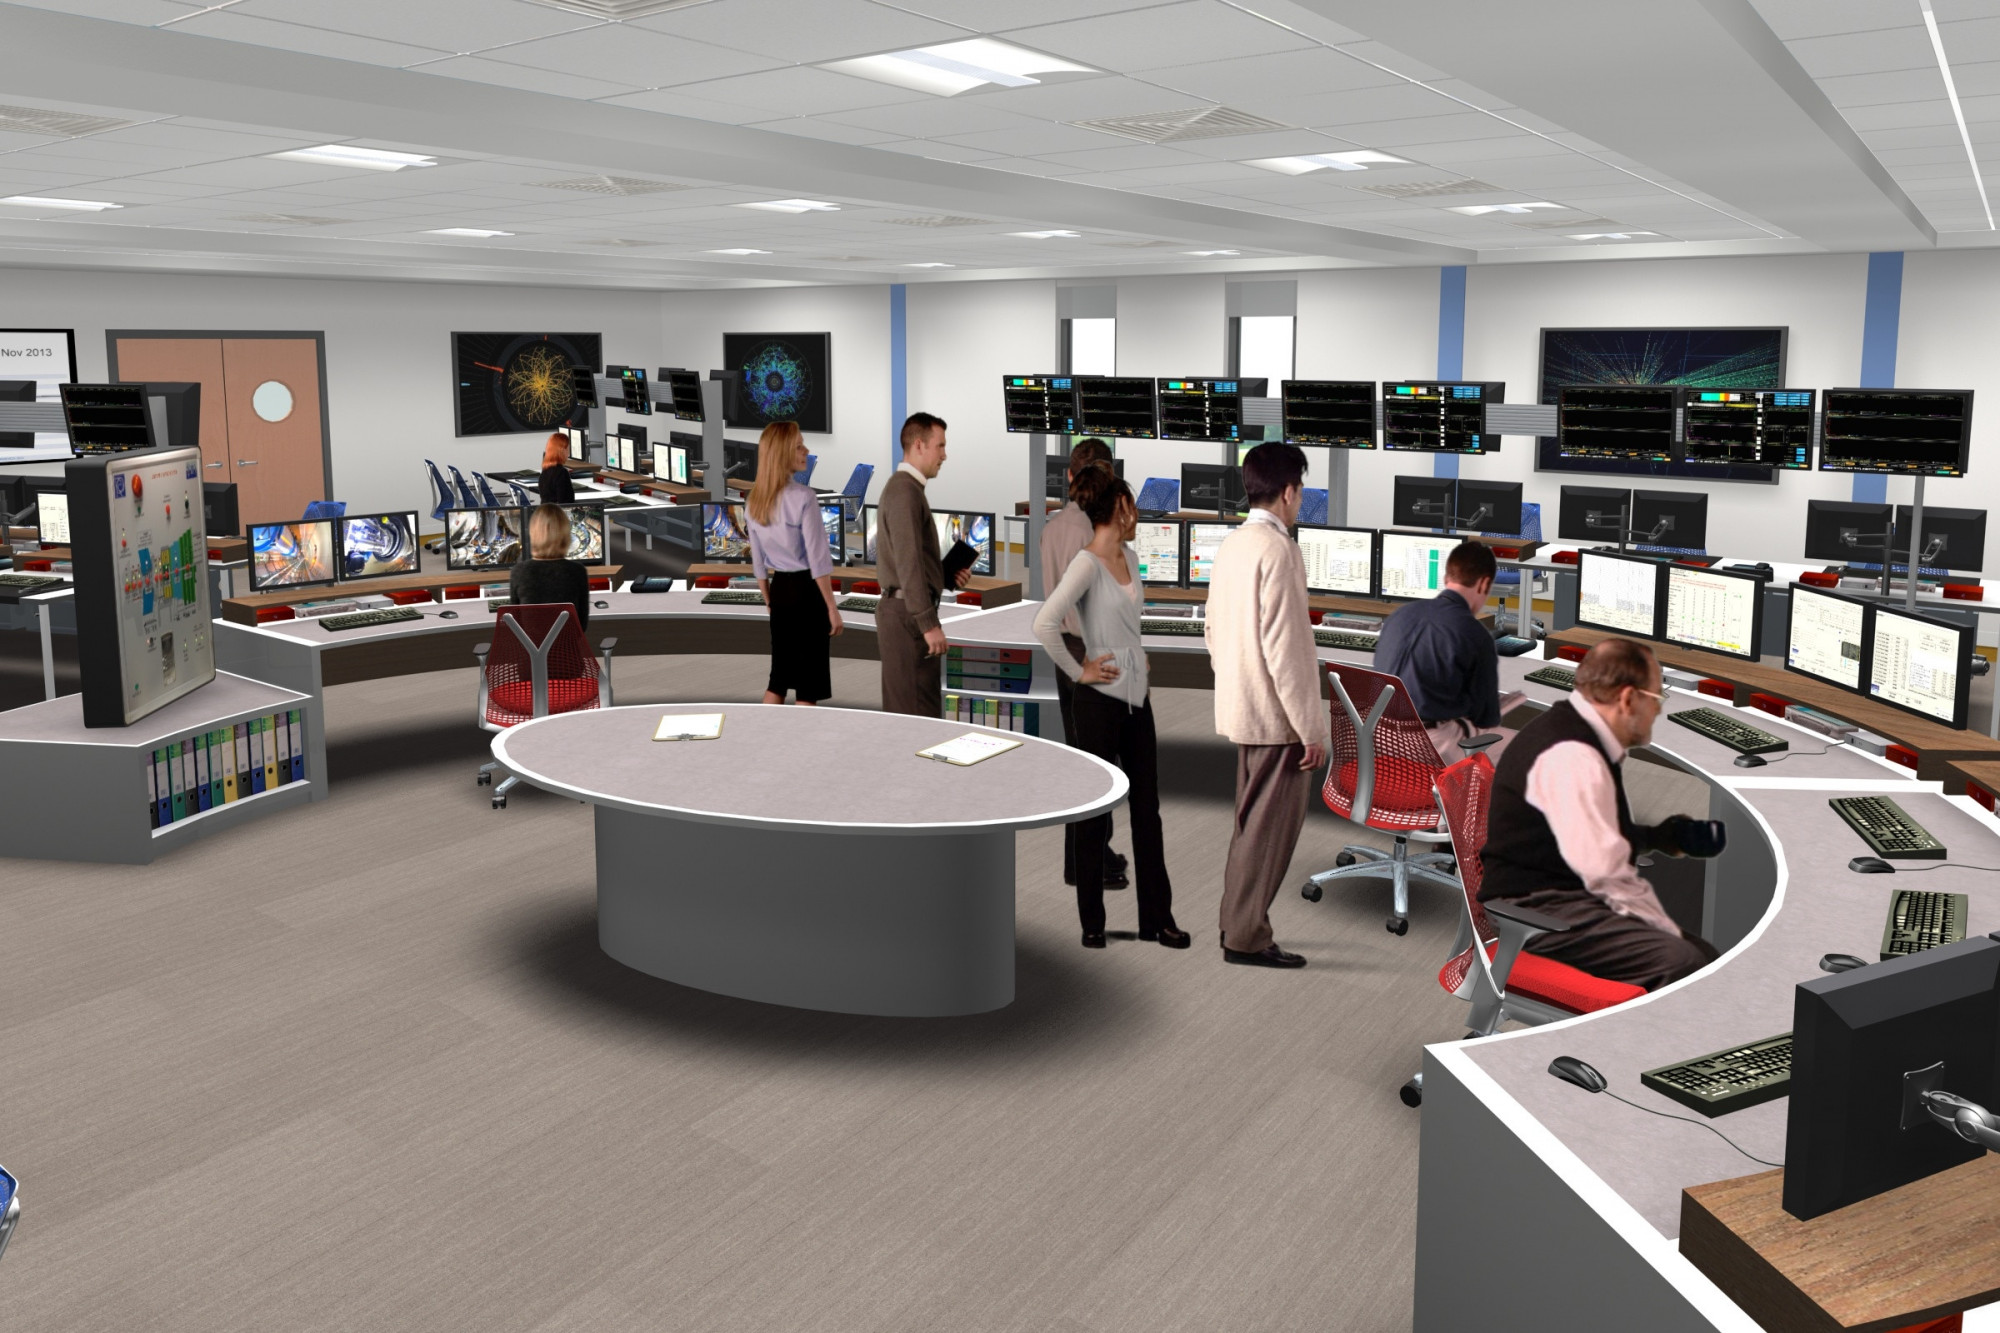 A visually rendered mock-up of members of the CERN team dispersed around the control room looking at monitors